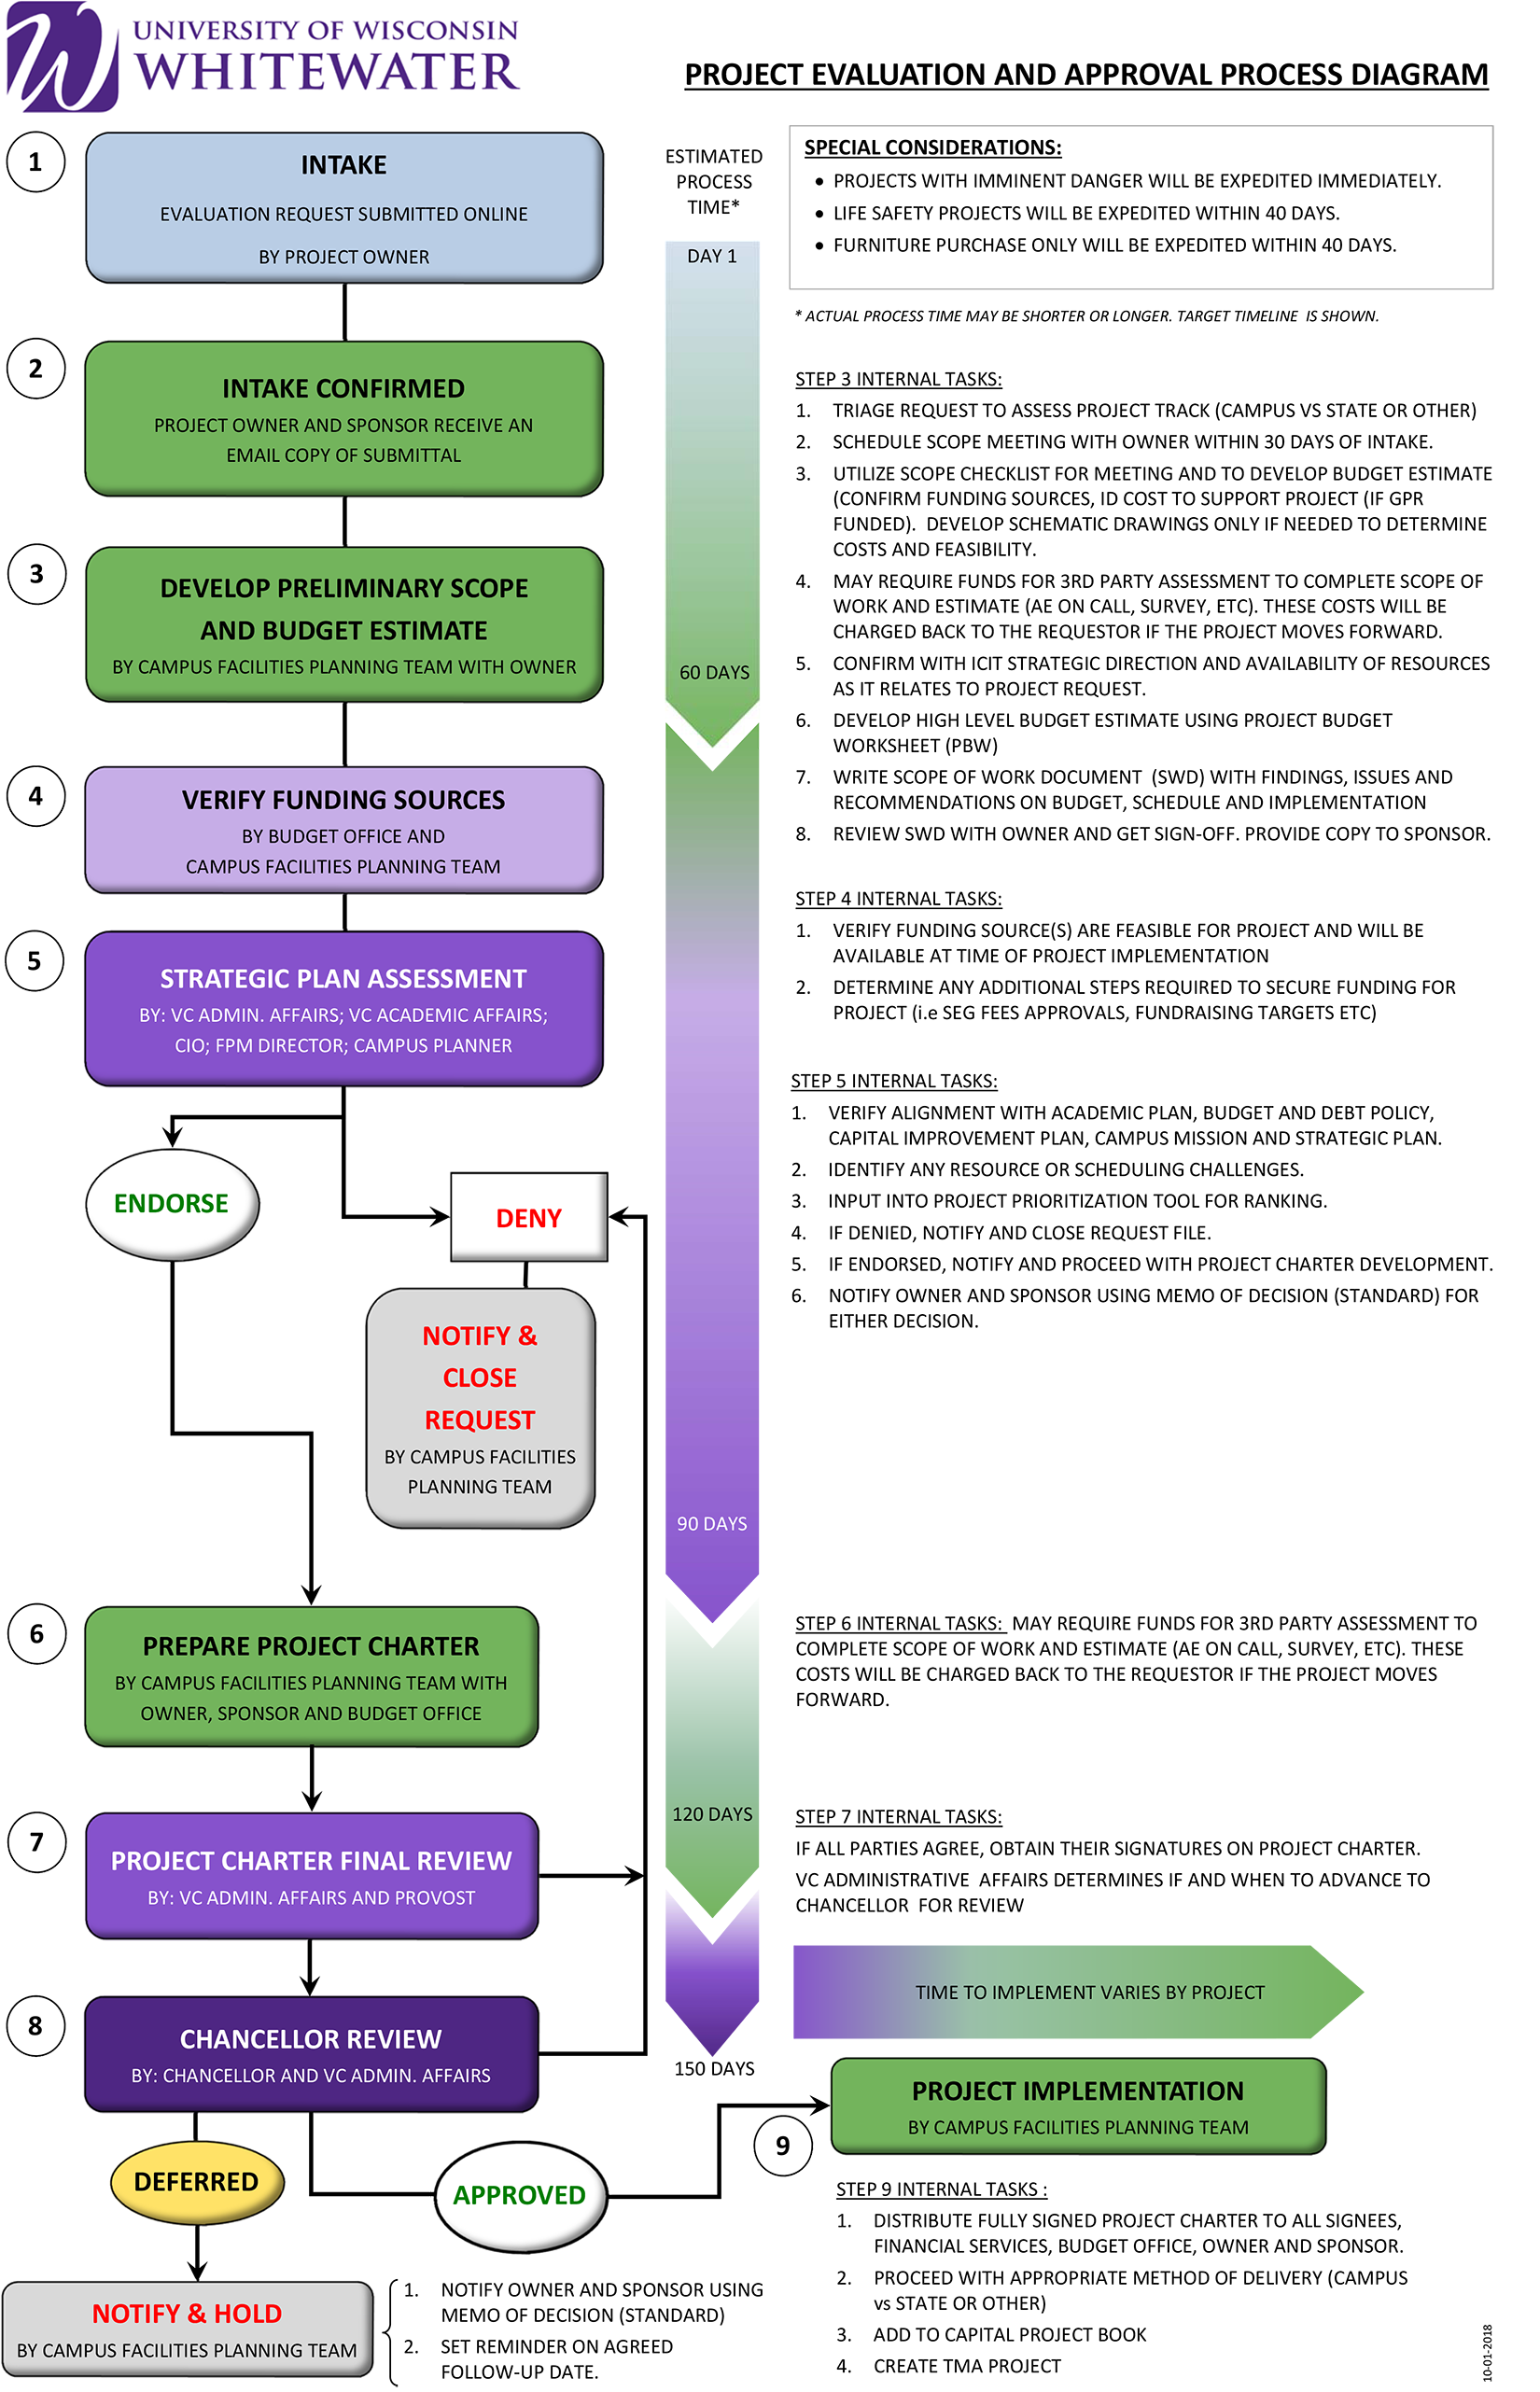 Flowchart diagramming the review and approval process for project evaluation requests